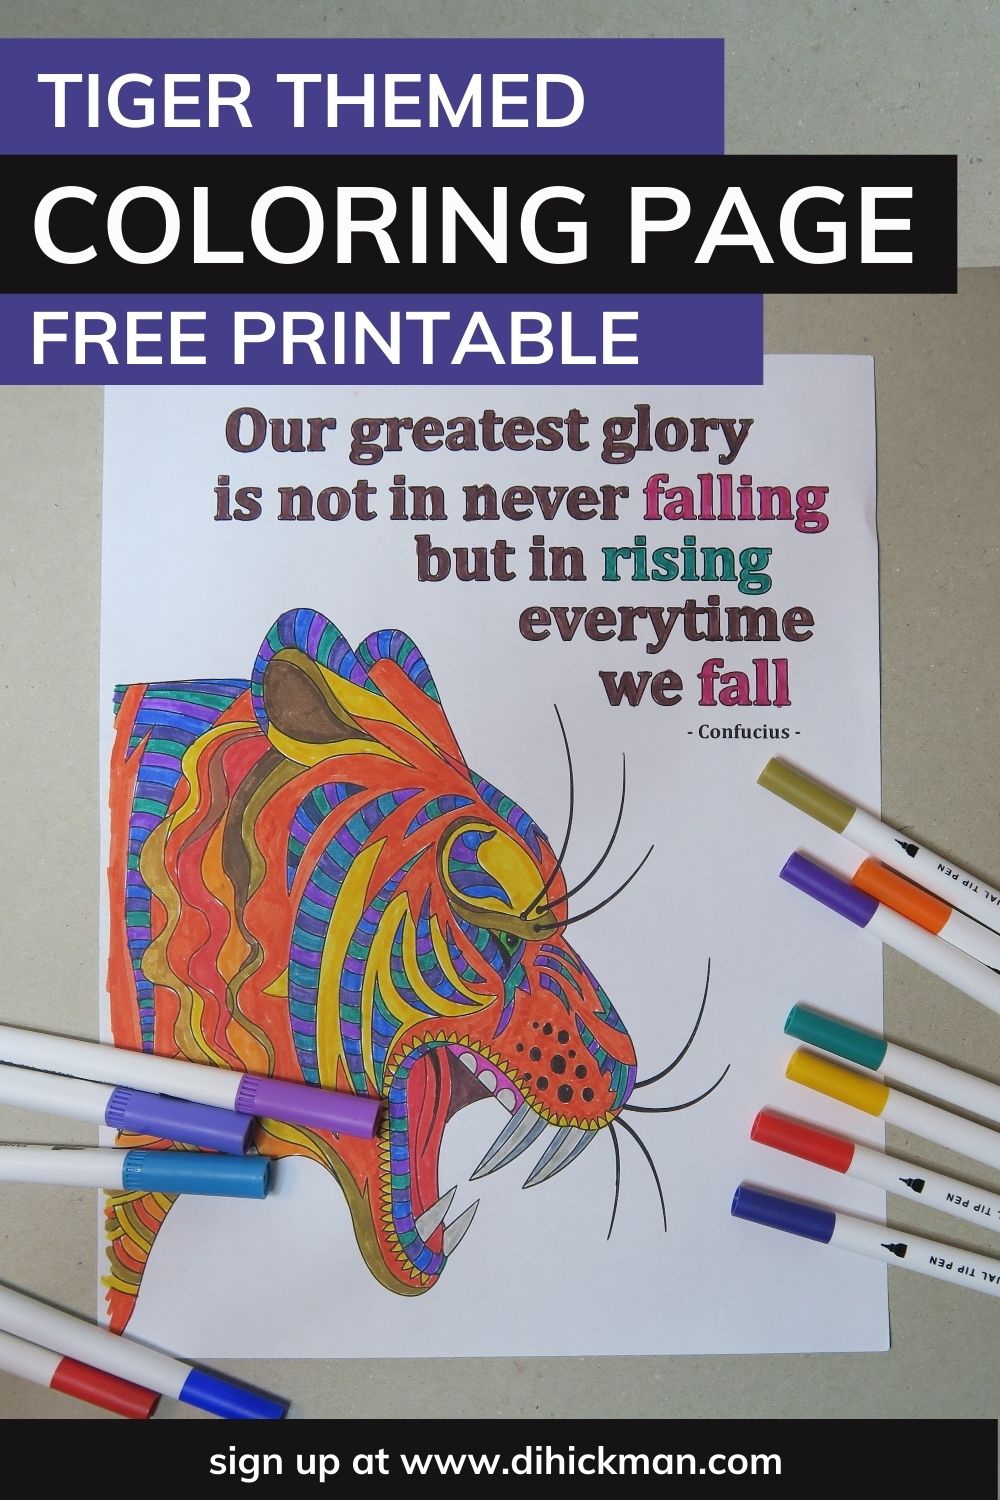 Tiger themed coloring page free printable with Confucious quote